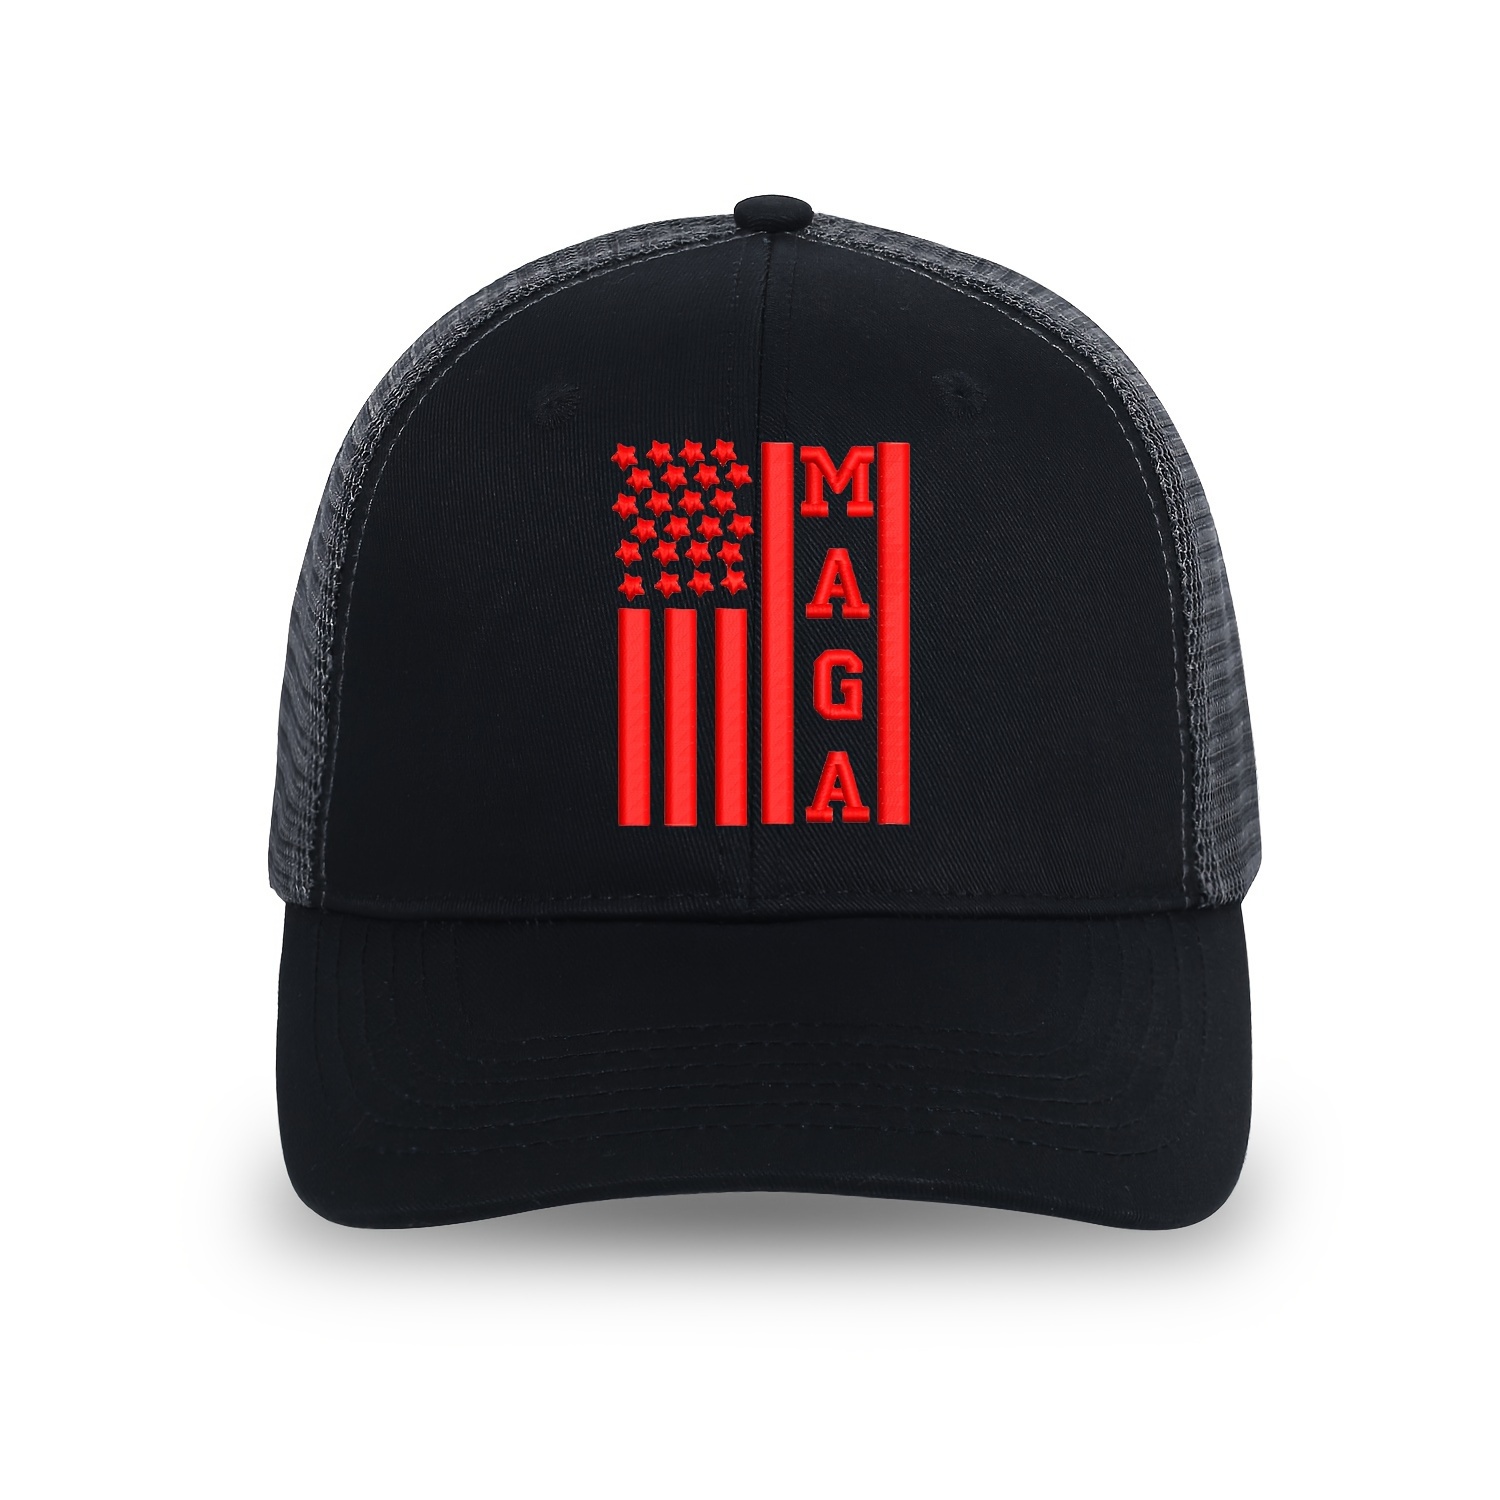 

Breathable And Lightweight Black Mesh Cap With Embroidered Maga Letters, Ideal For Outdoor Sports And Leisure Activities